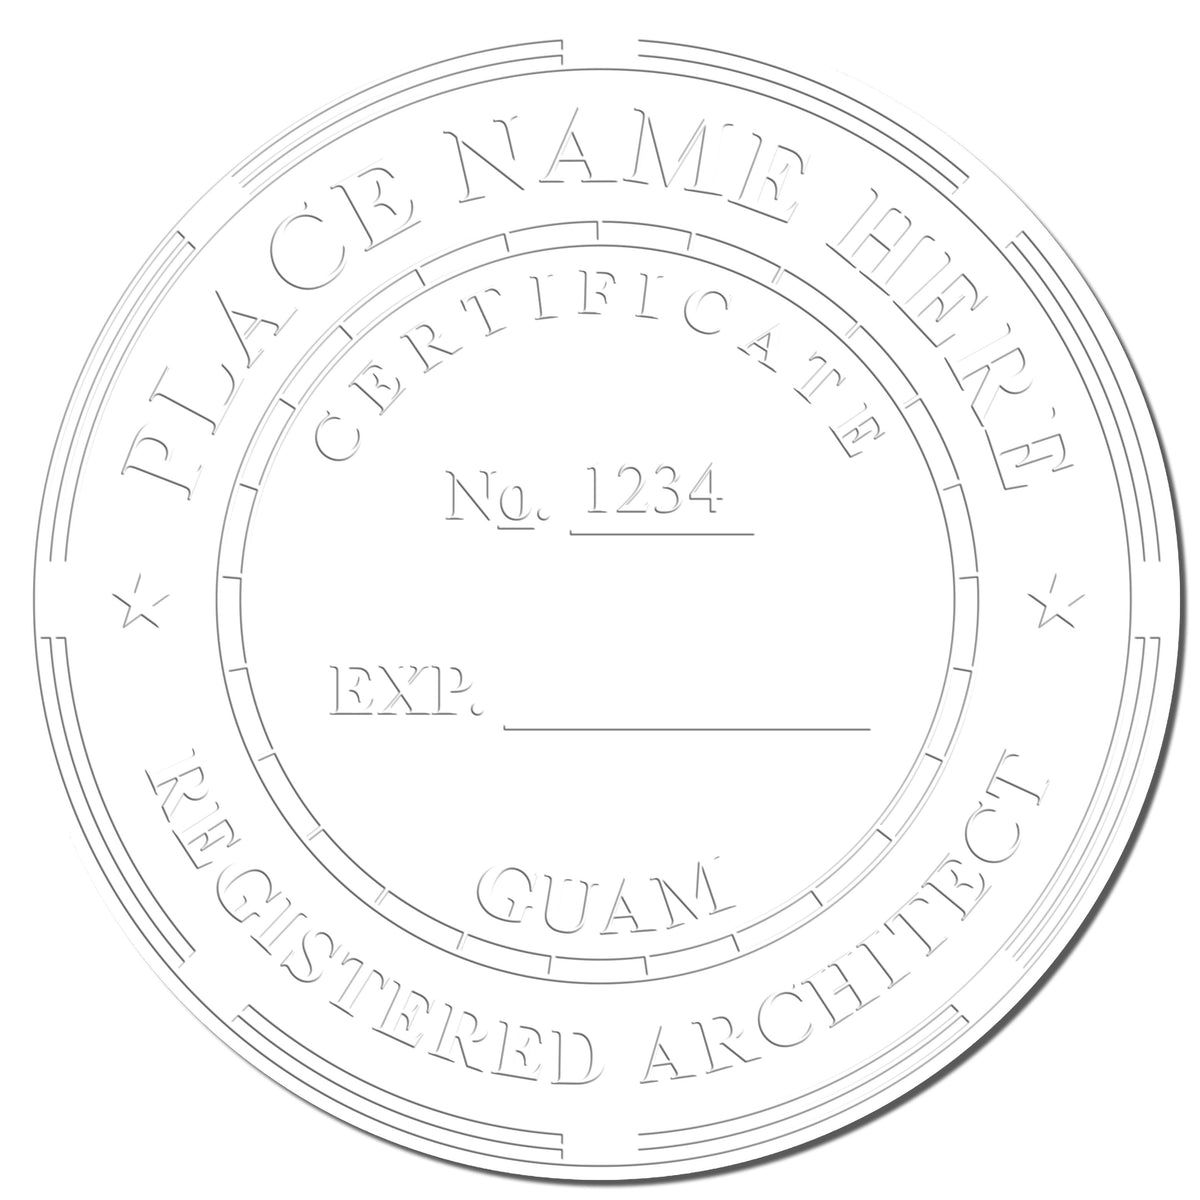 A photograph of the Guam Desk Architect Embossing Seal stamp impression reveals a vivid, professional image of the on paper.